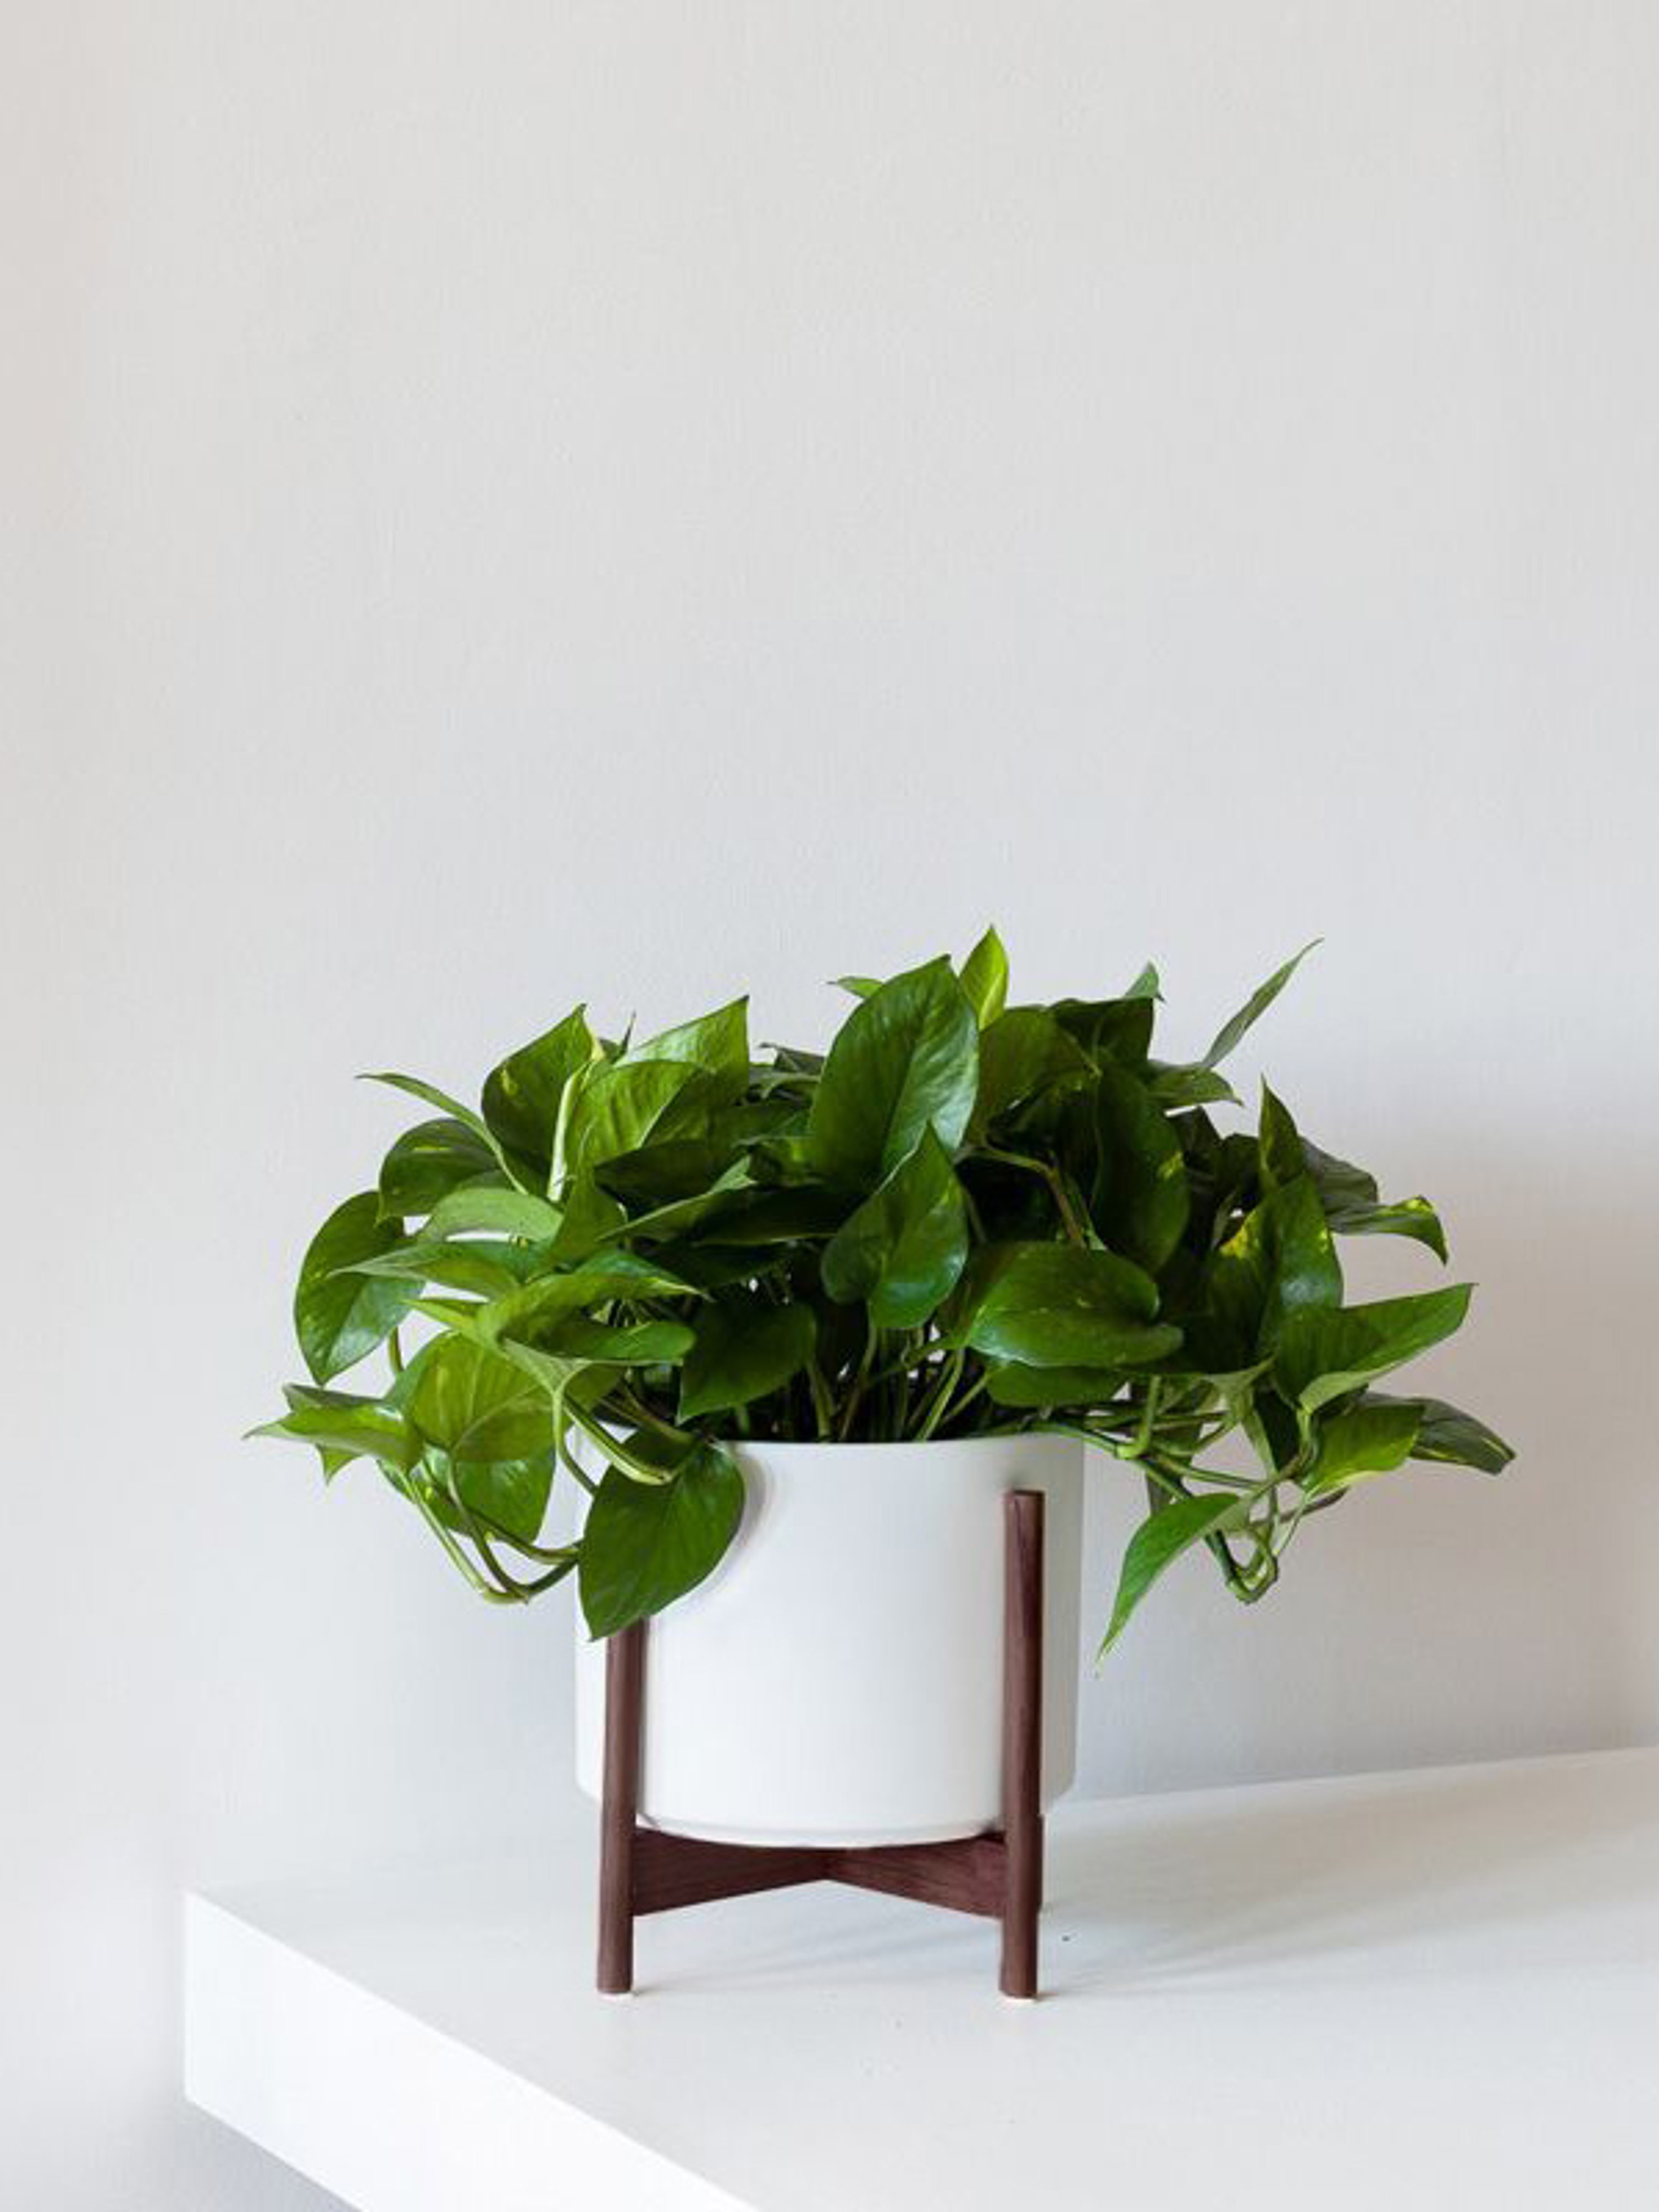 Leon & George Medium Cascading Pothos With Mid-century Ceramic Pot In White With Wood Stand